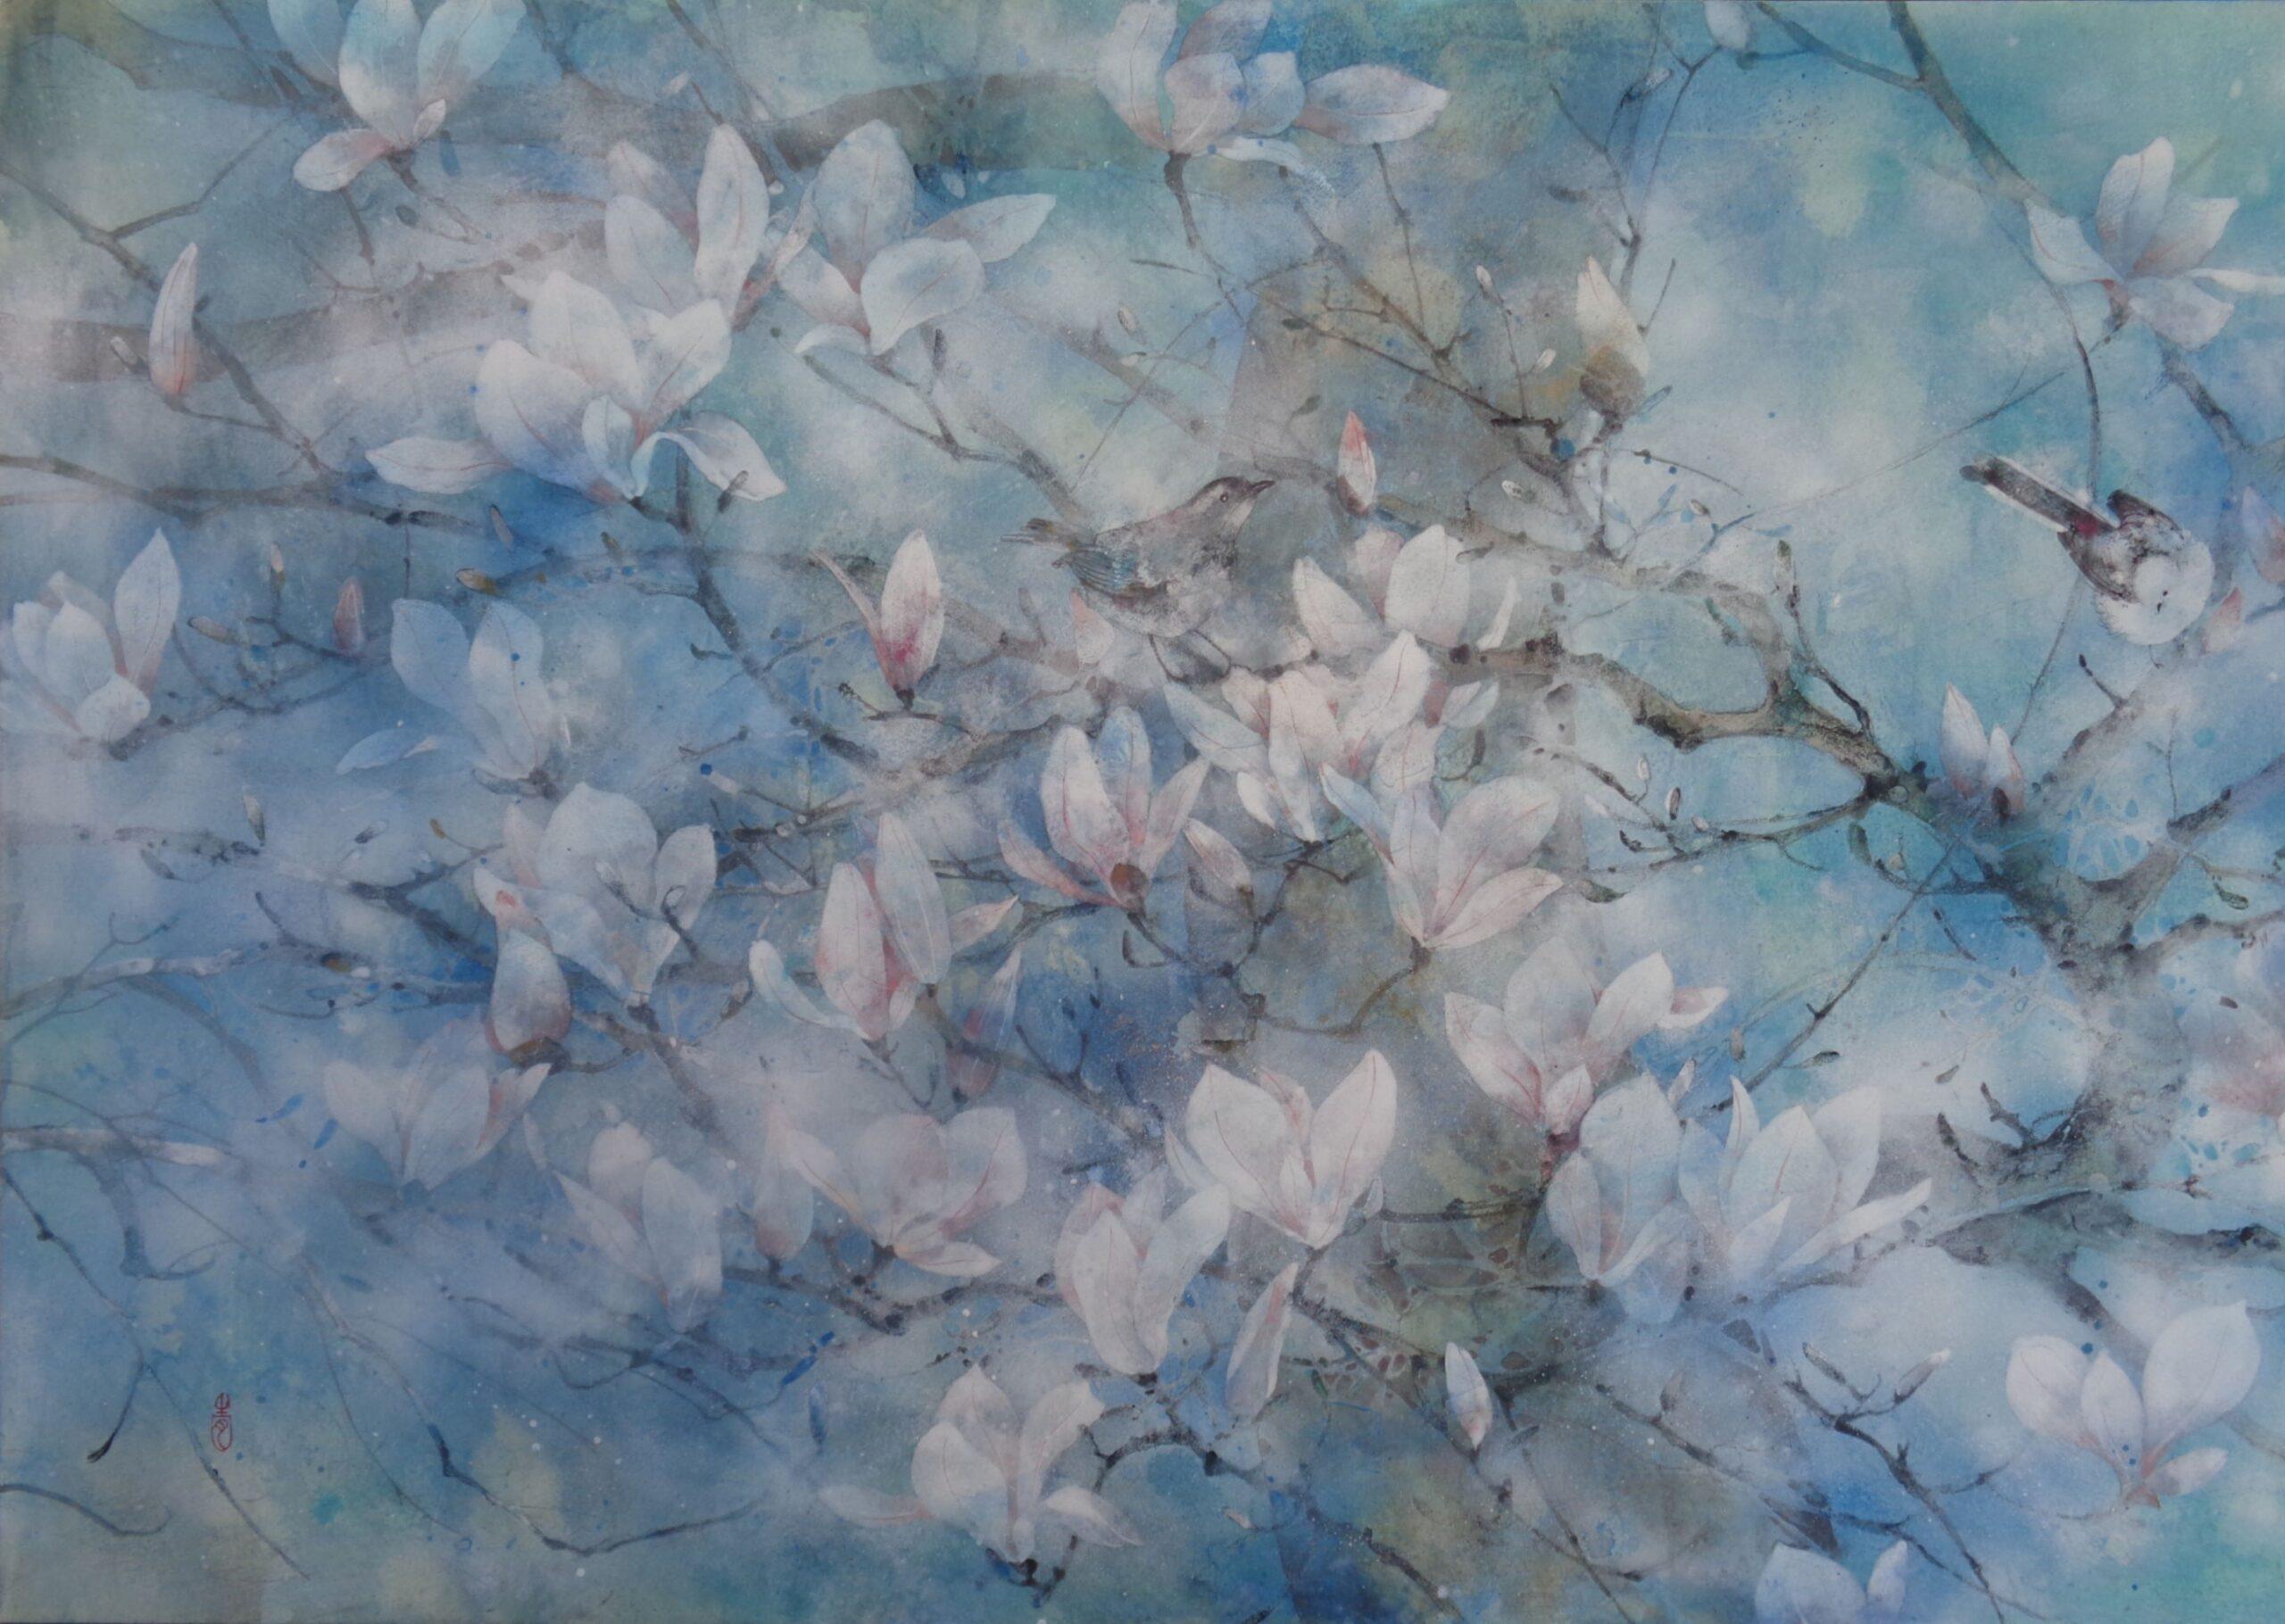 Yiching Chen Figurative Painting - The spring wind by Chen Yiching - Contemporary nihonga painting, magnolia flower